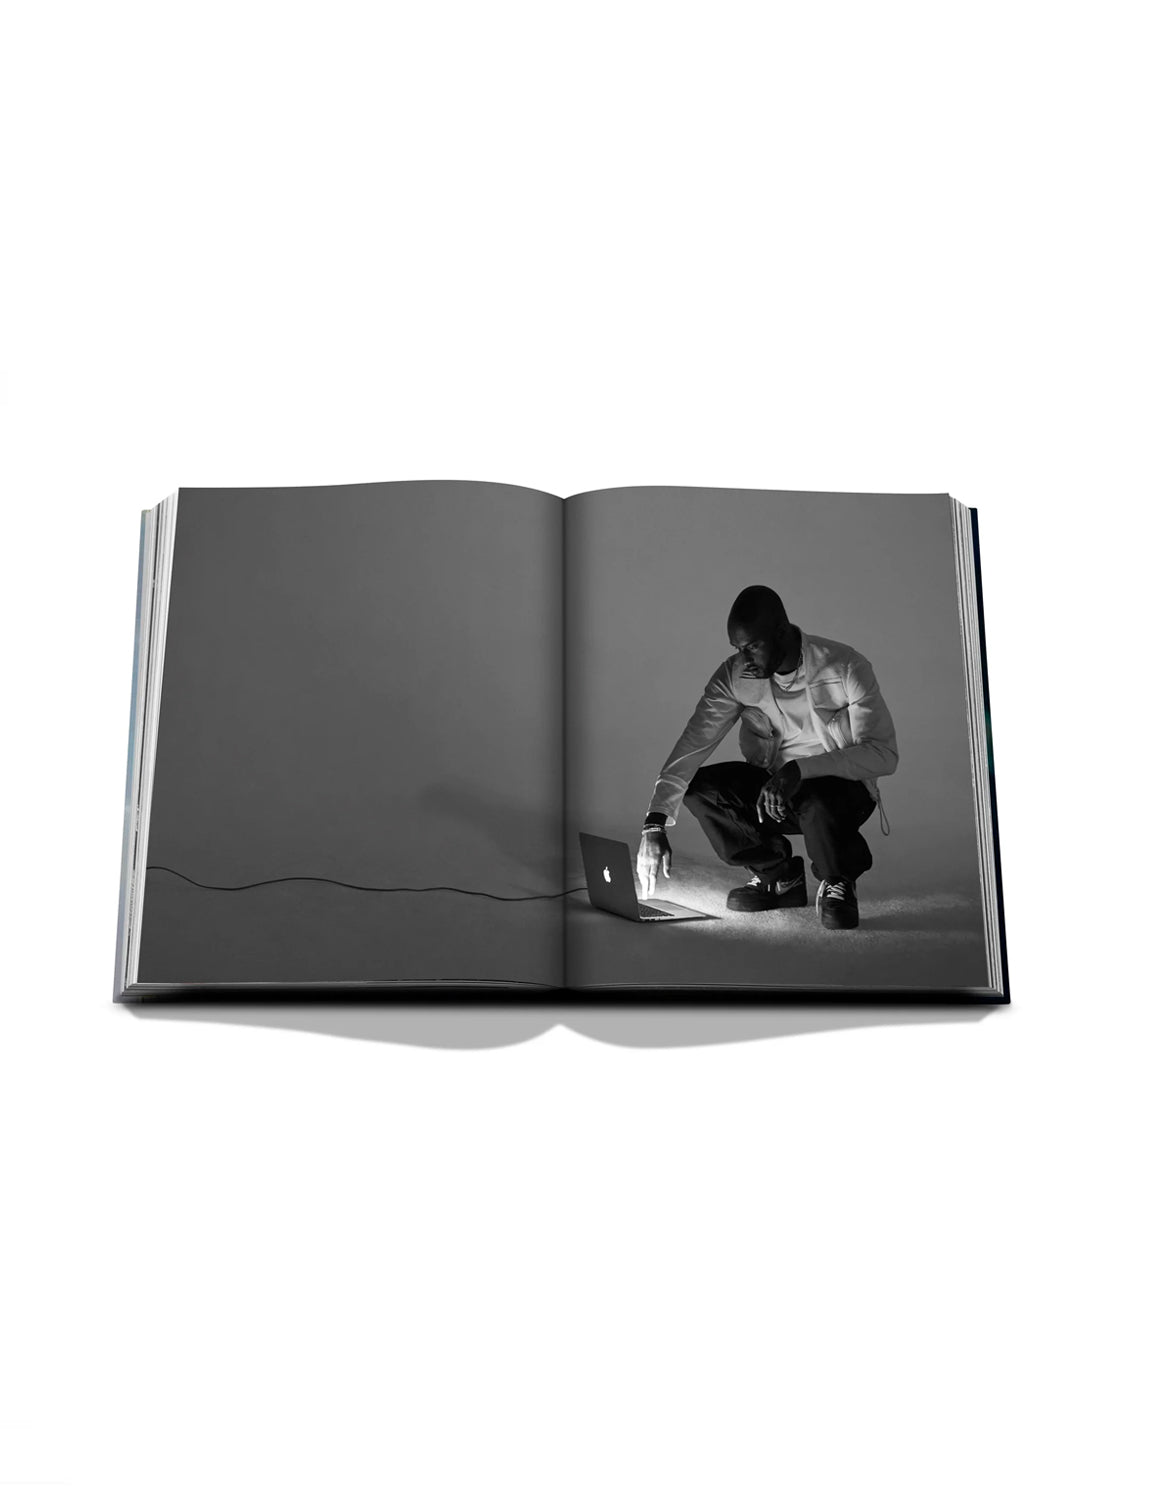 Louis Vuitton: Virgil Abloh (Balloon) by Anders Christian Madsen - Coffee  Table Book